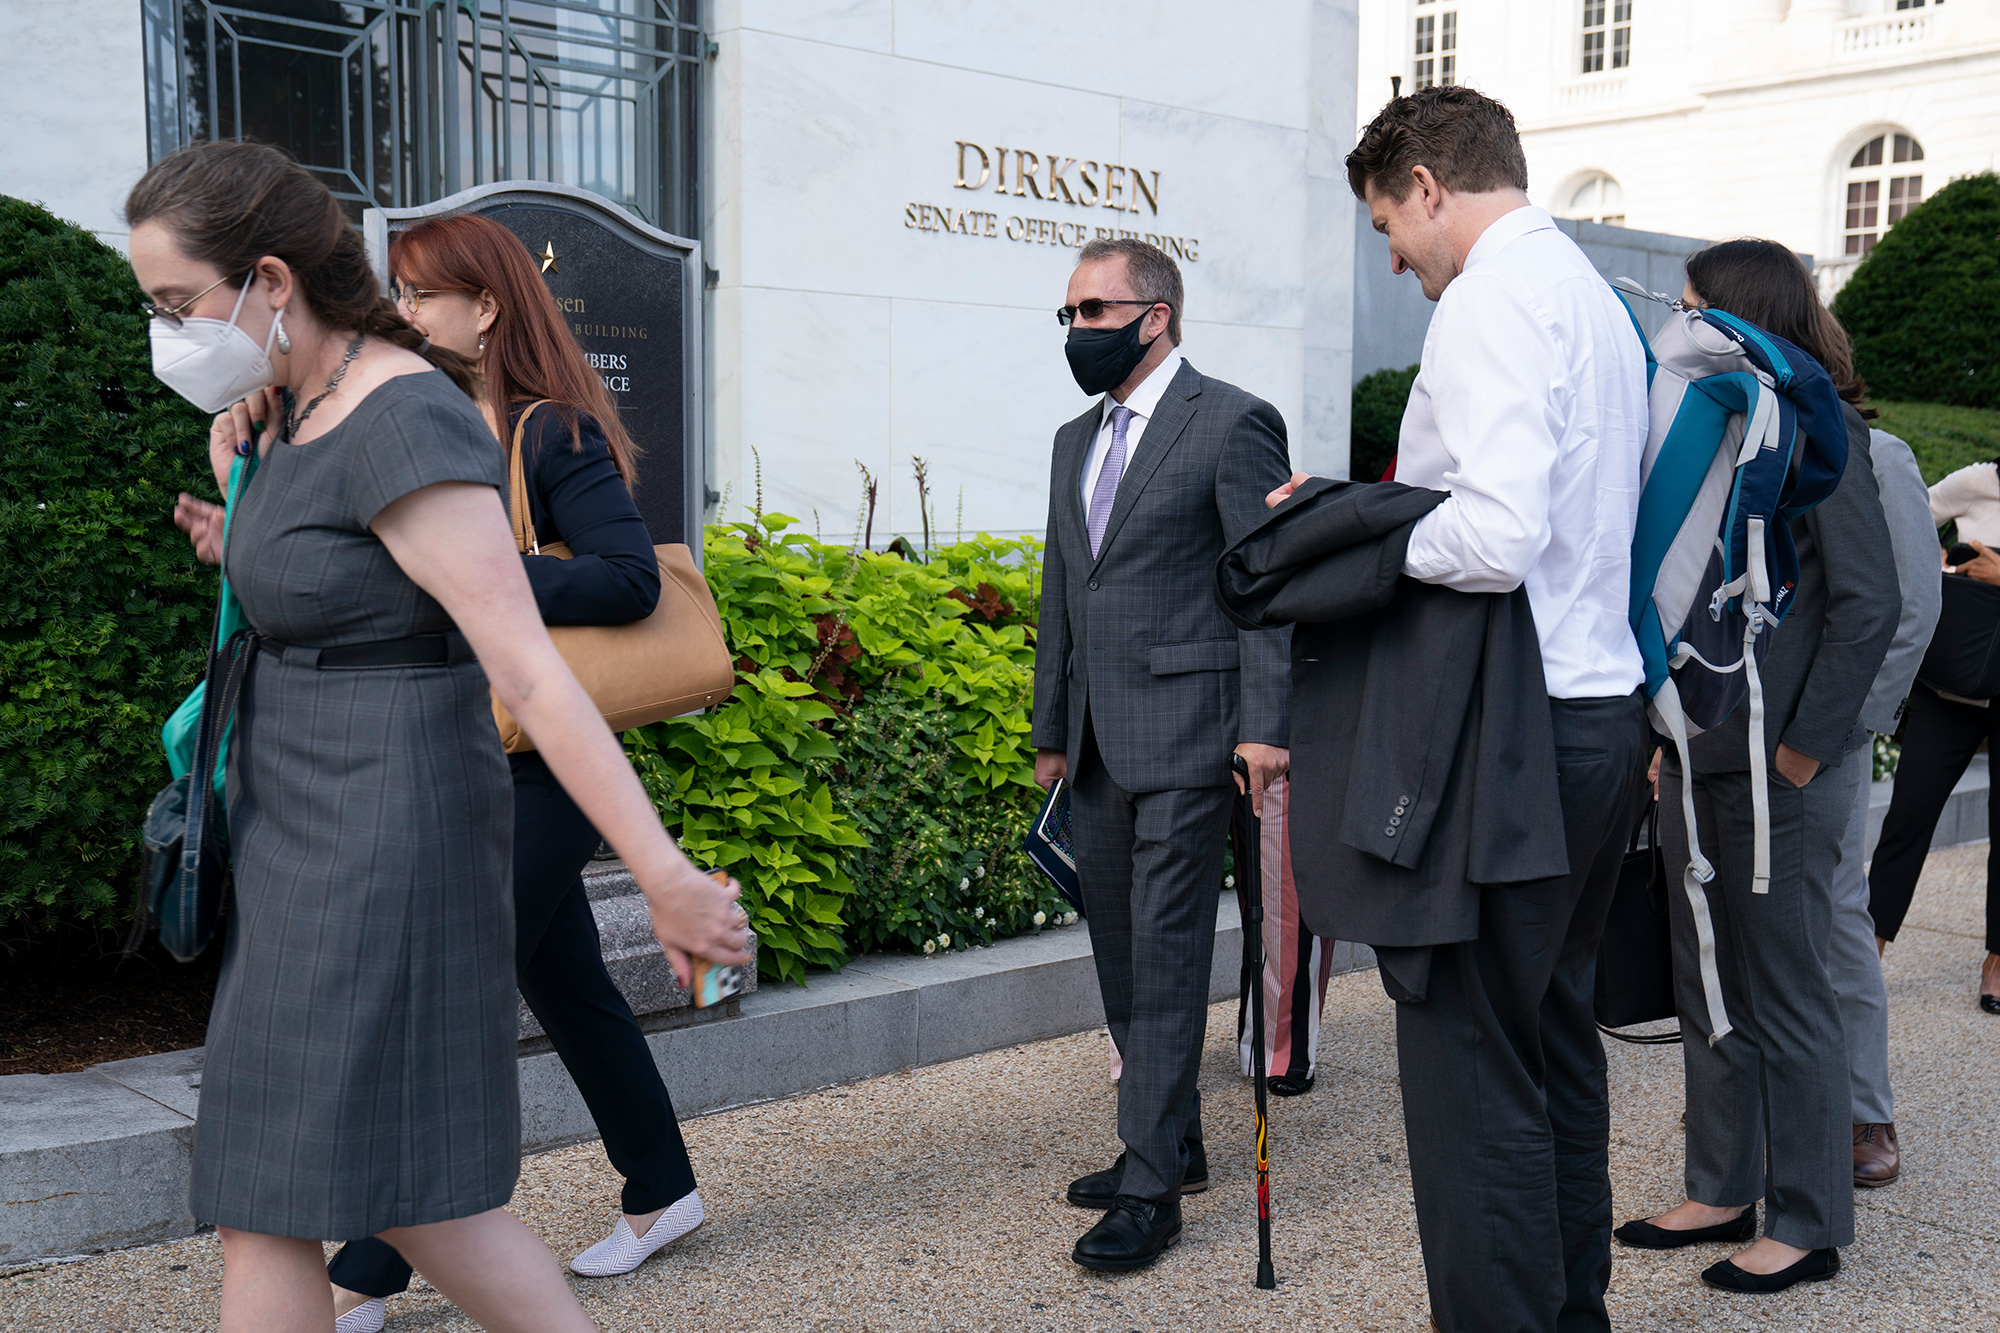 Peiter Zatko arrives at the Senate building for the Data Security at Risk hearing in Washington on Tuesday, September 13.